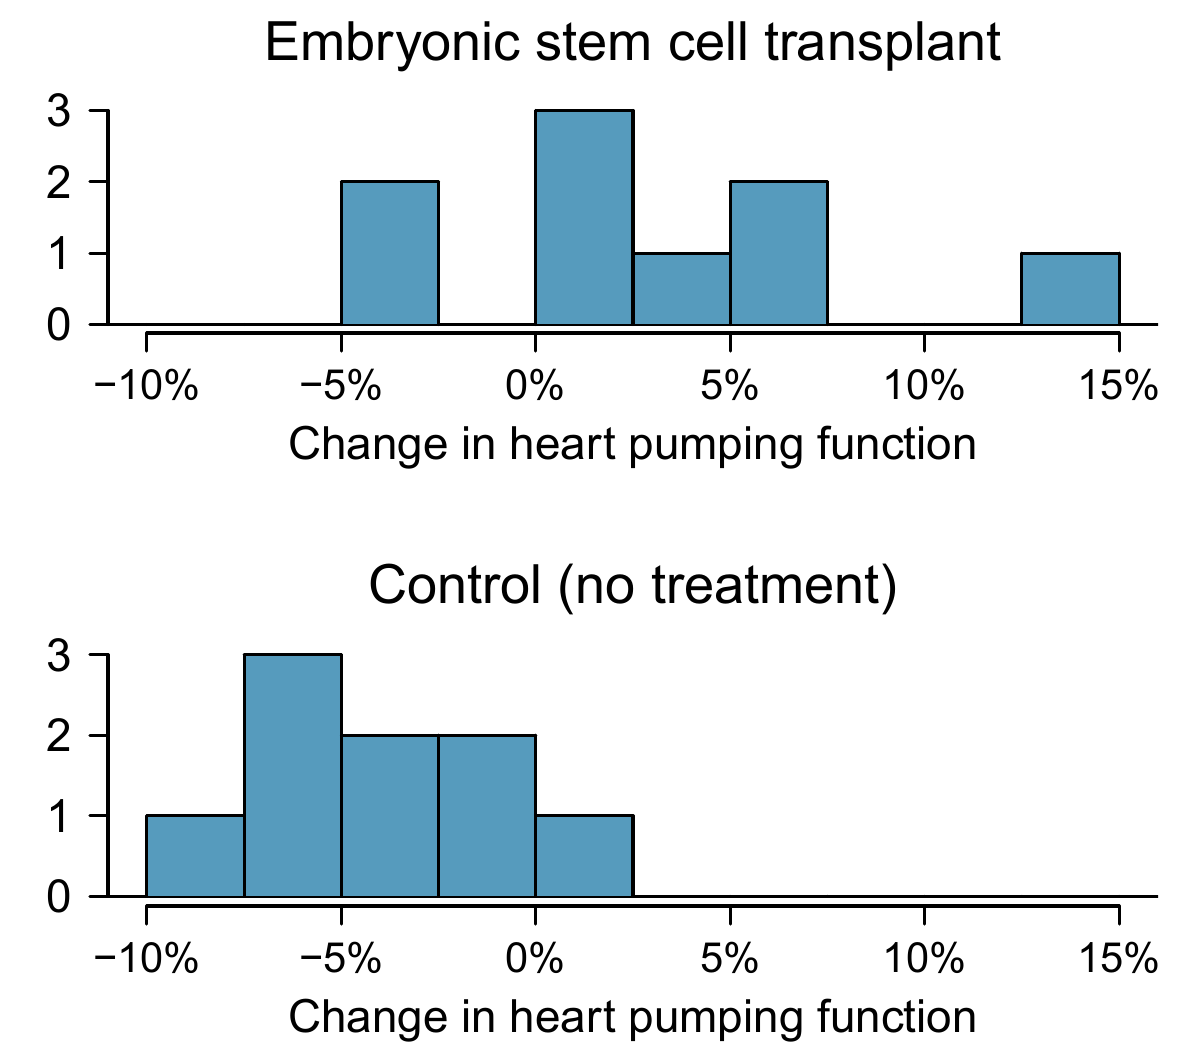 Histograms for both the embryonic stem cell group and the control group. Higher values are associated with greater improvement. We don't see any evidence of skew in these data; however, it is worth noting that skew would be difficult to detect with such a small sample.